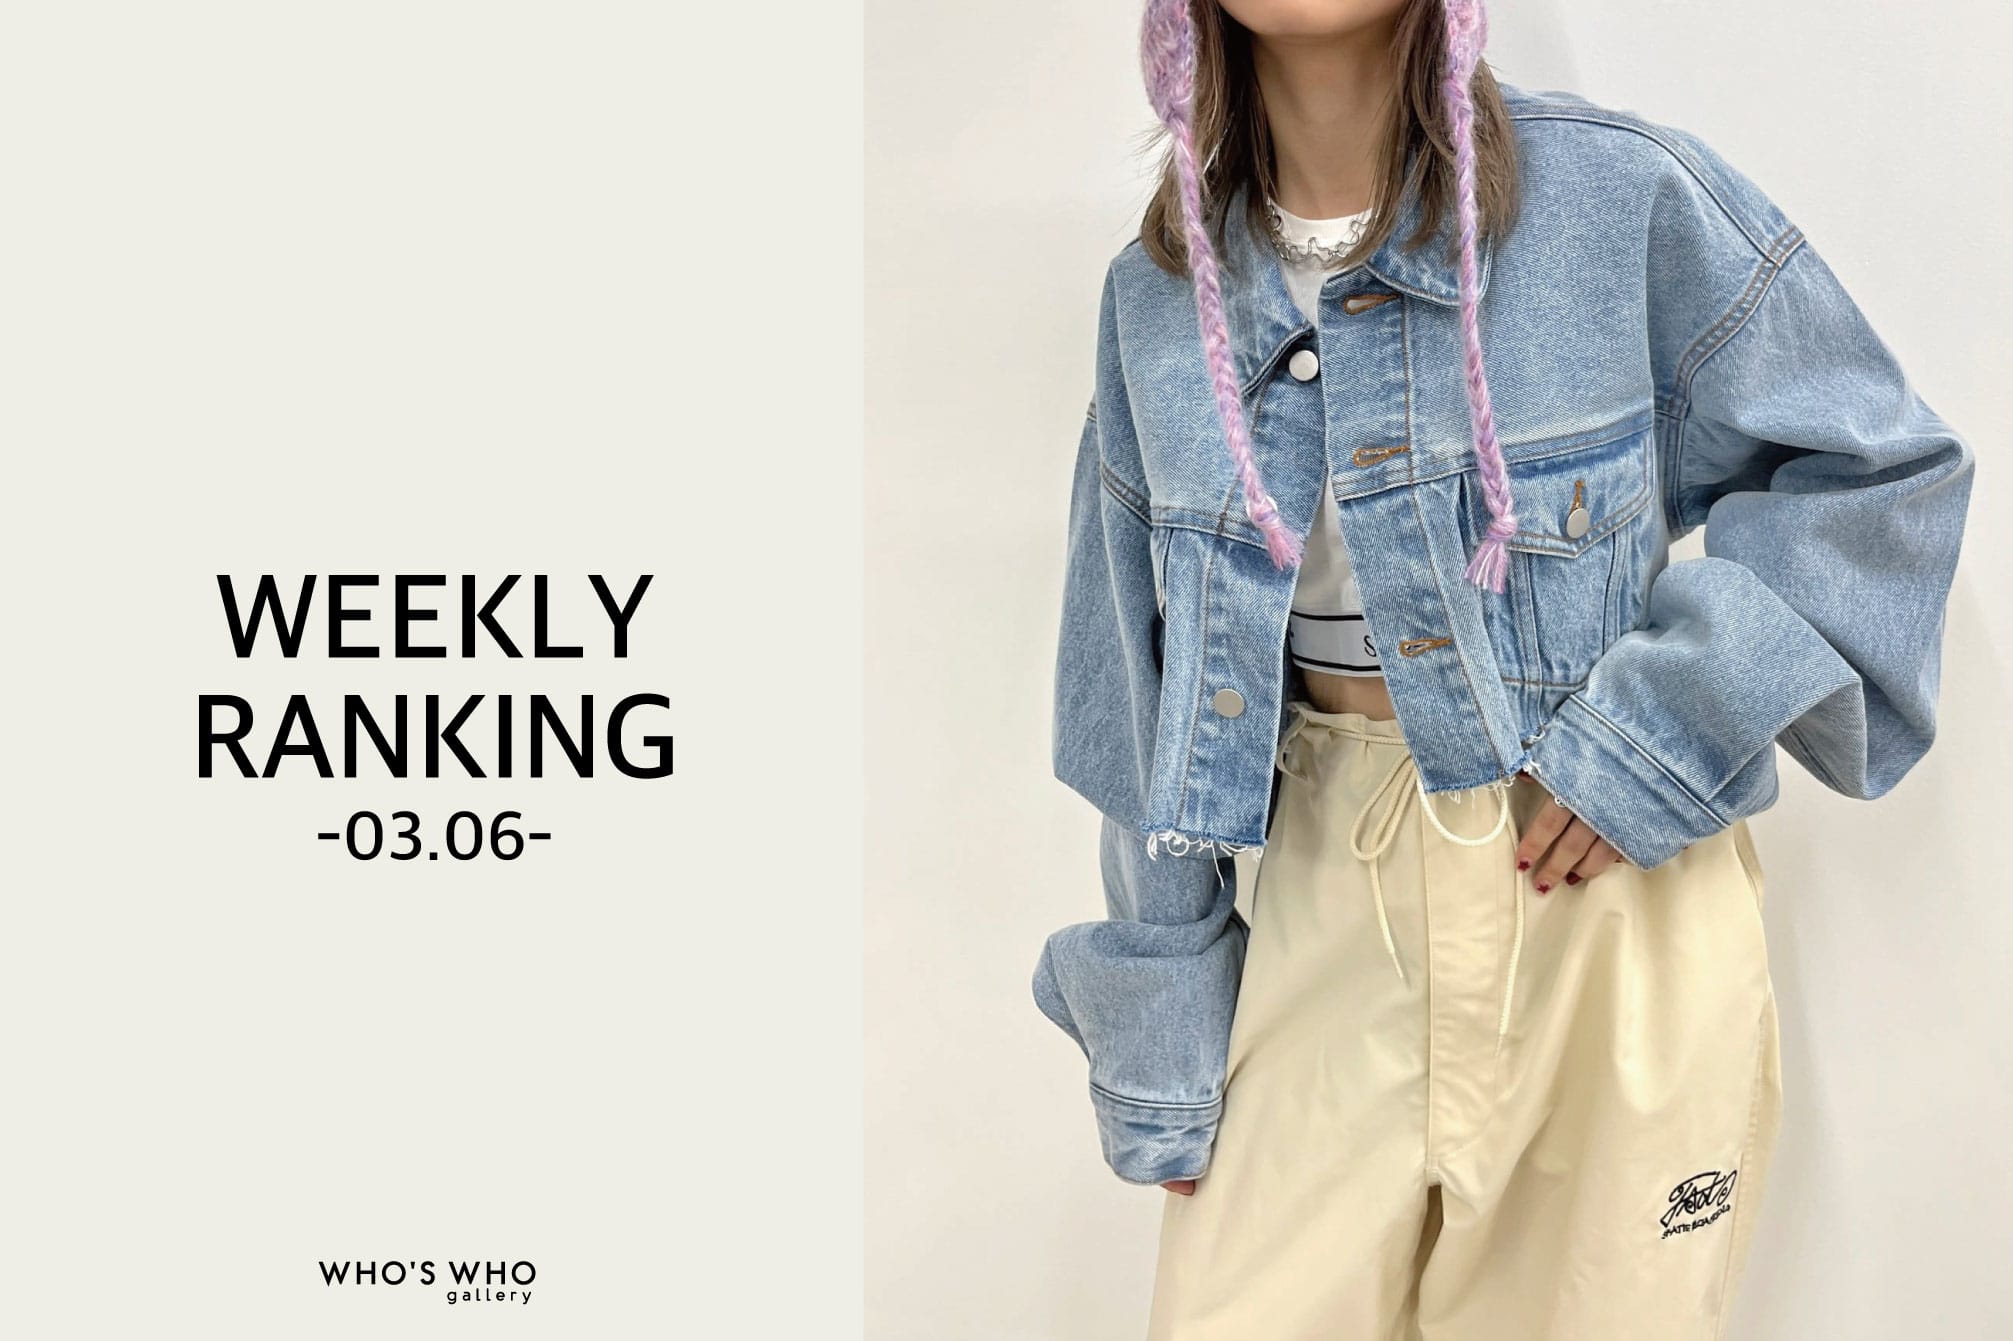 WHO’S WHO gallery 【WEEKLY RANKING -03.06-】